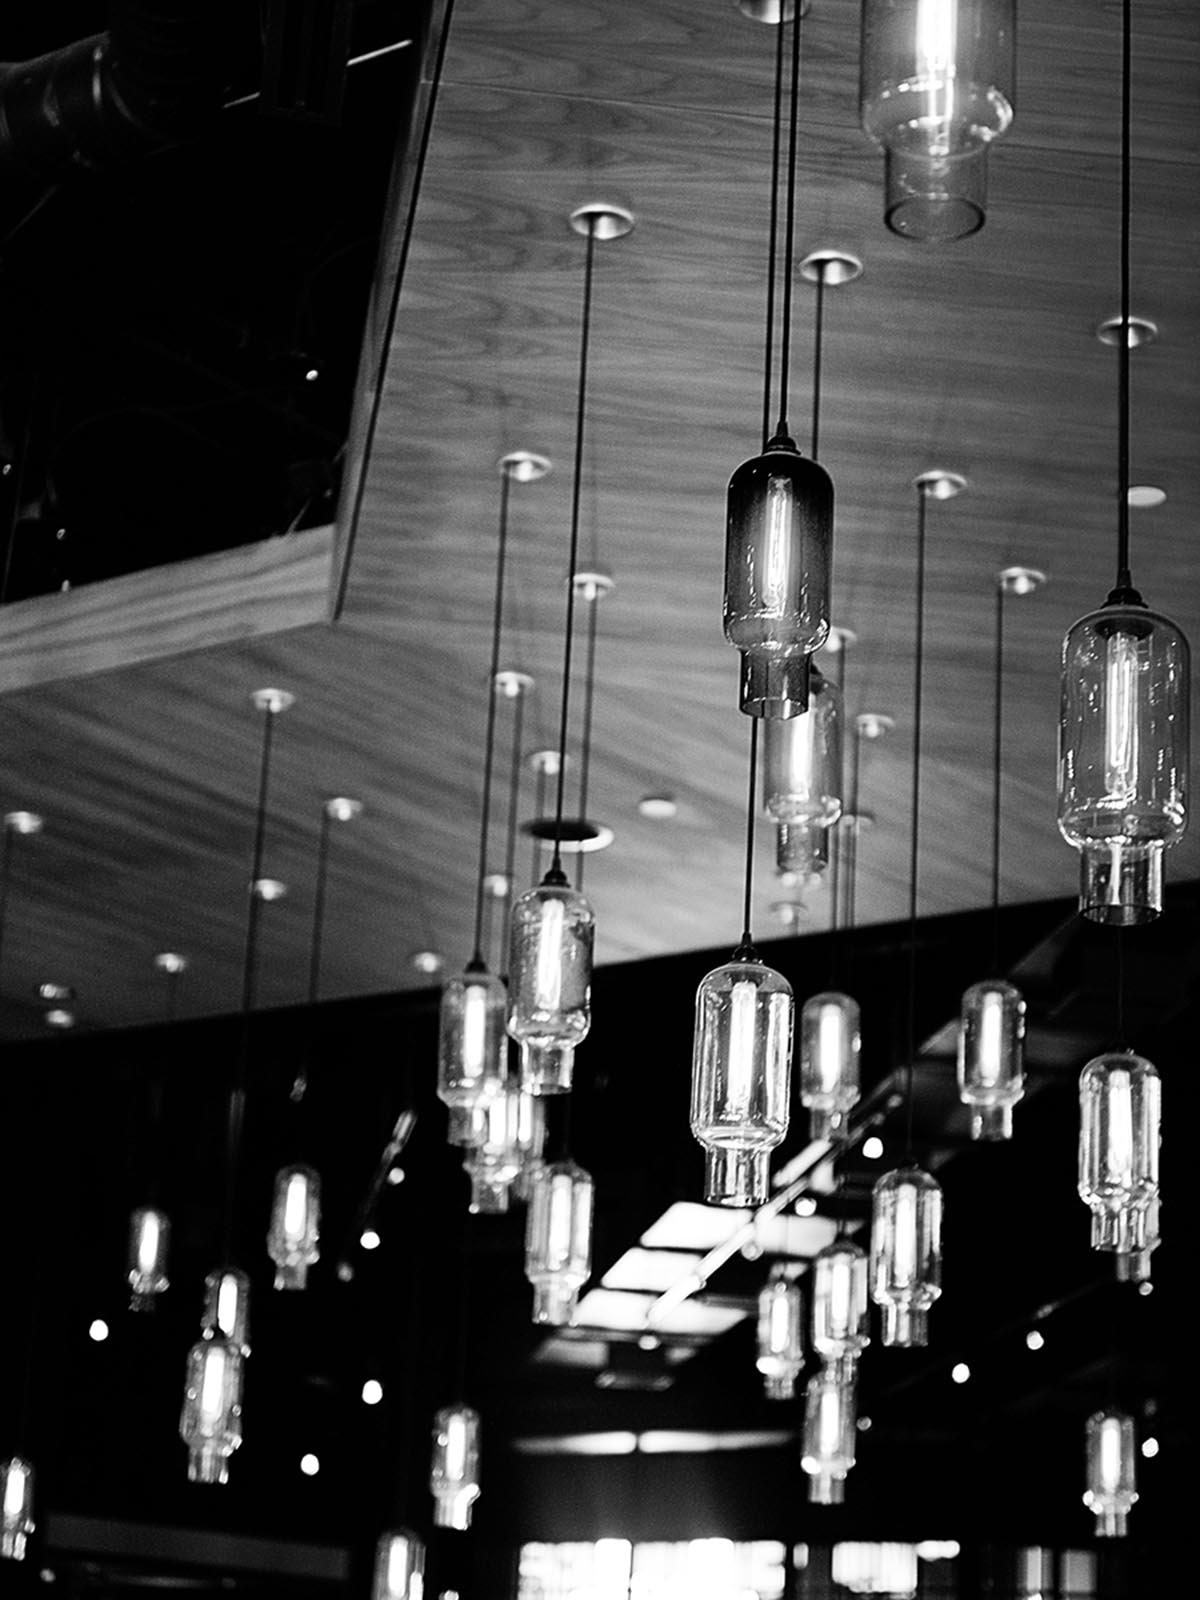 Image of a ceiling lamps in a restaurant.